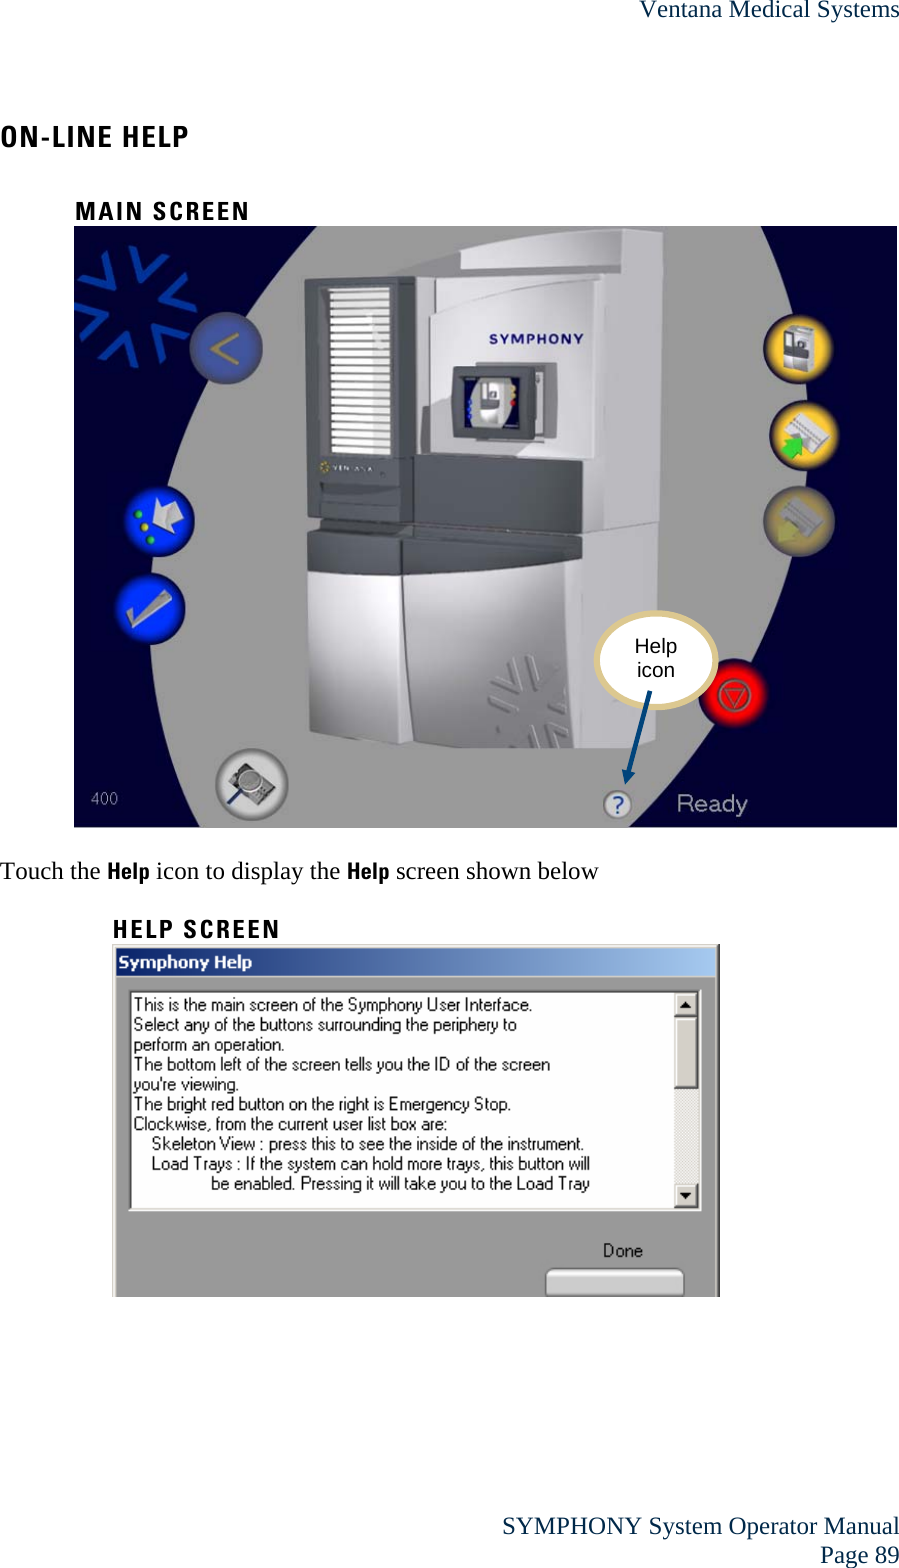 Ventana Medical Systems  SYMPHONY System Operator Manual Page 89 ON-LINE HELP  MAIN SCREEN   Touch the Help icon to display the Help screen shown below  HELP SCREEN   Help icon 